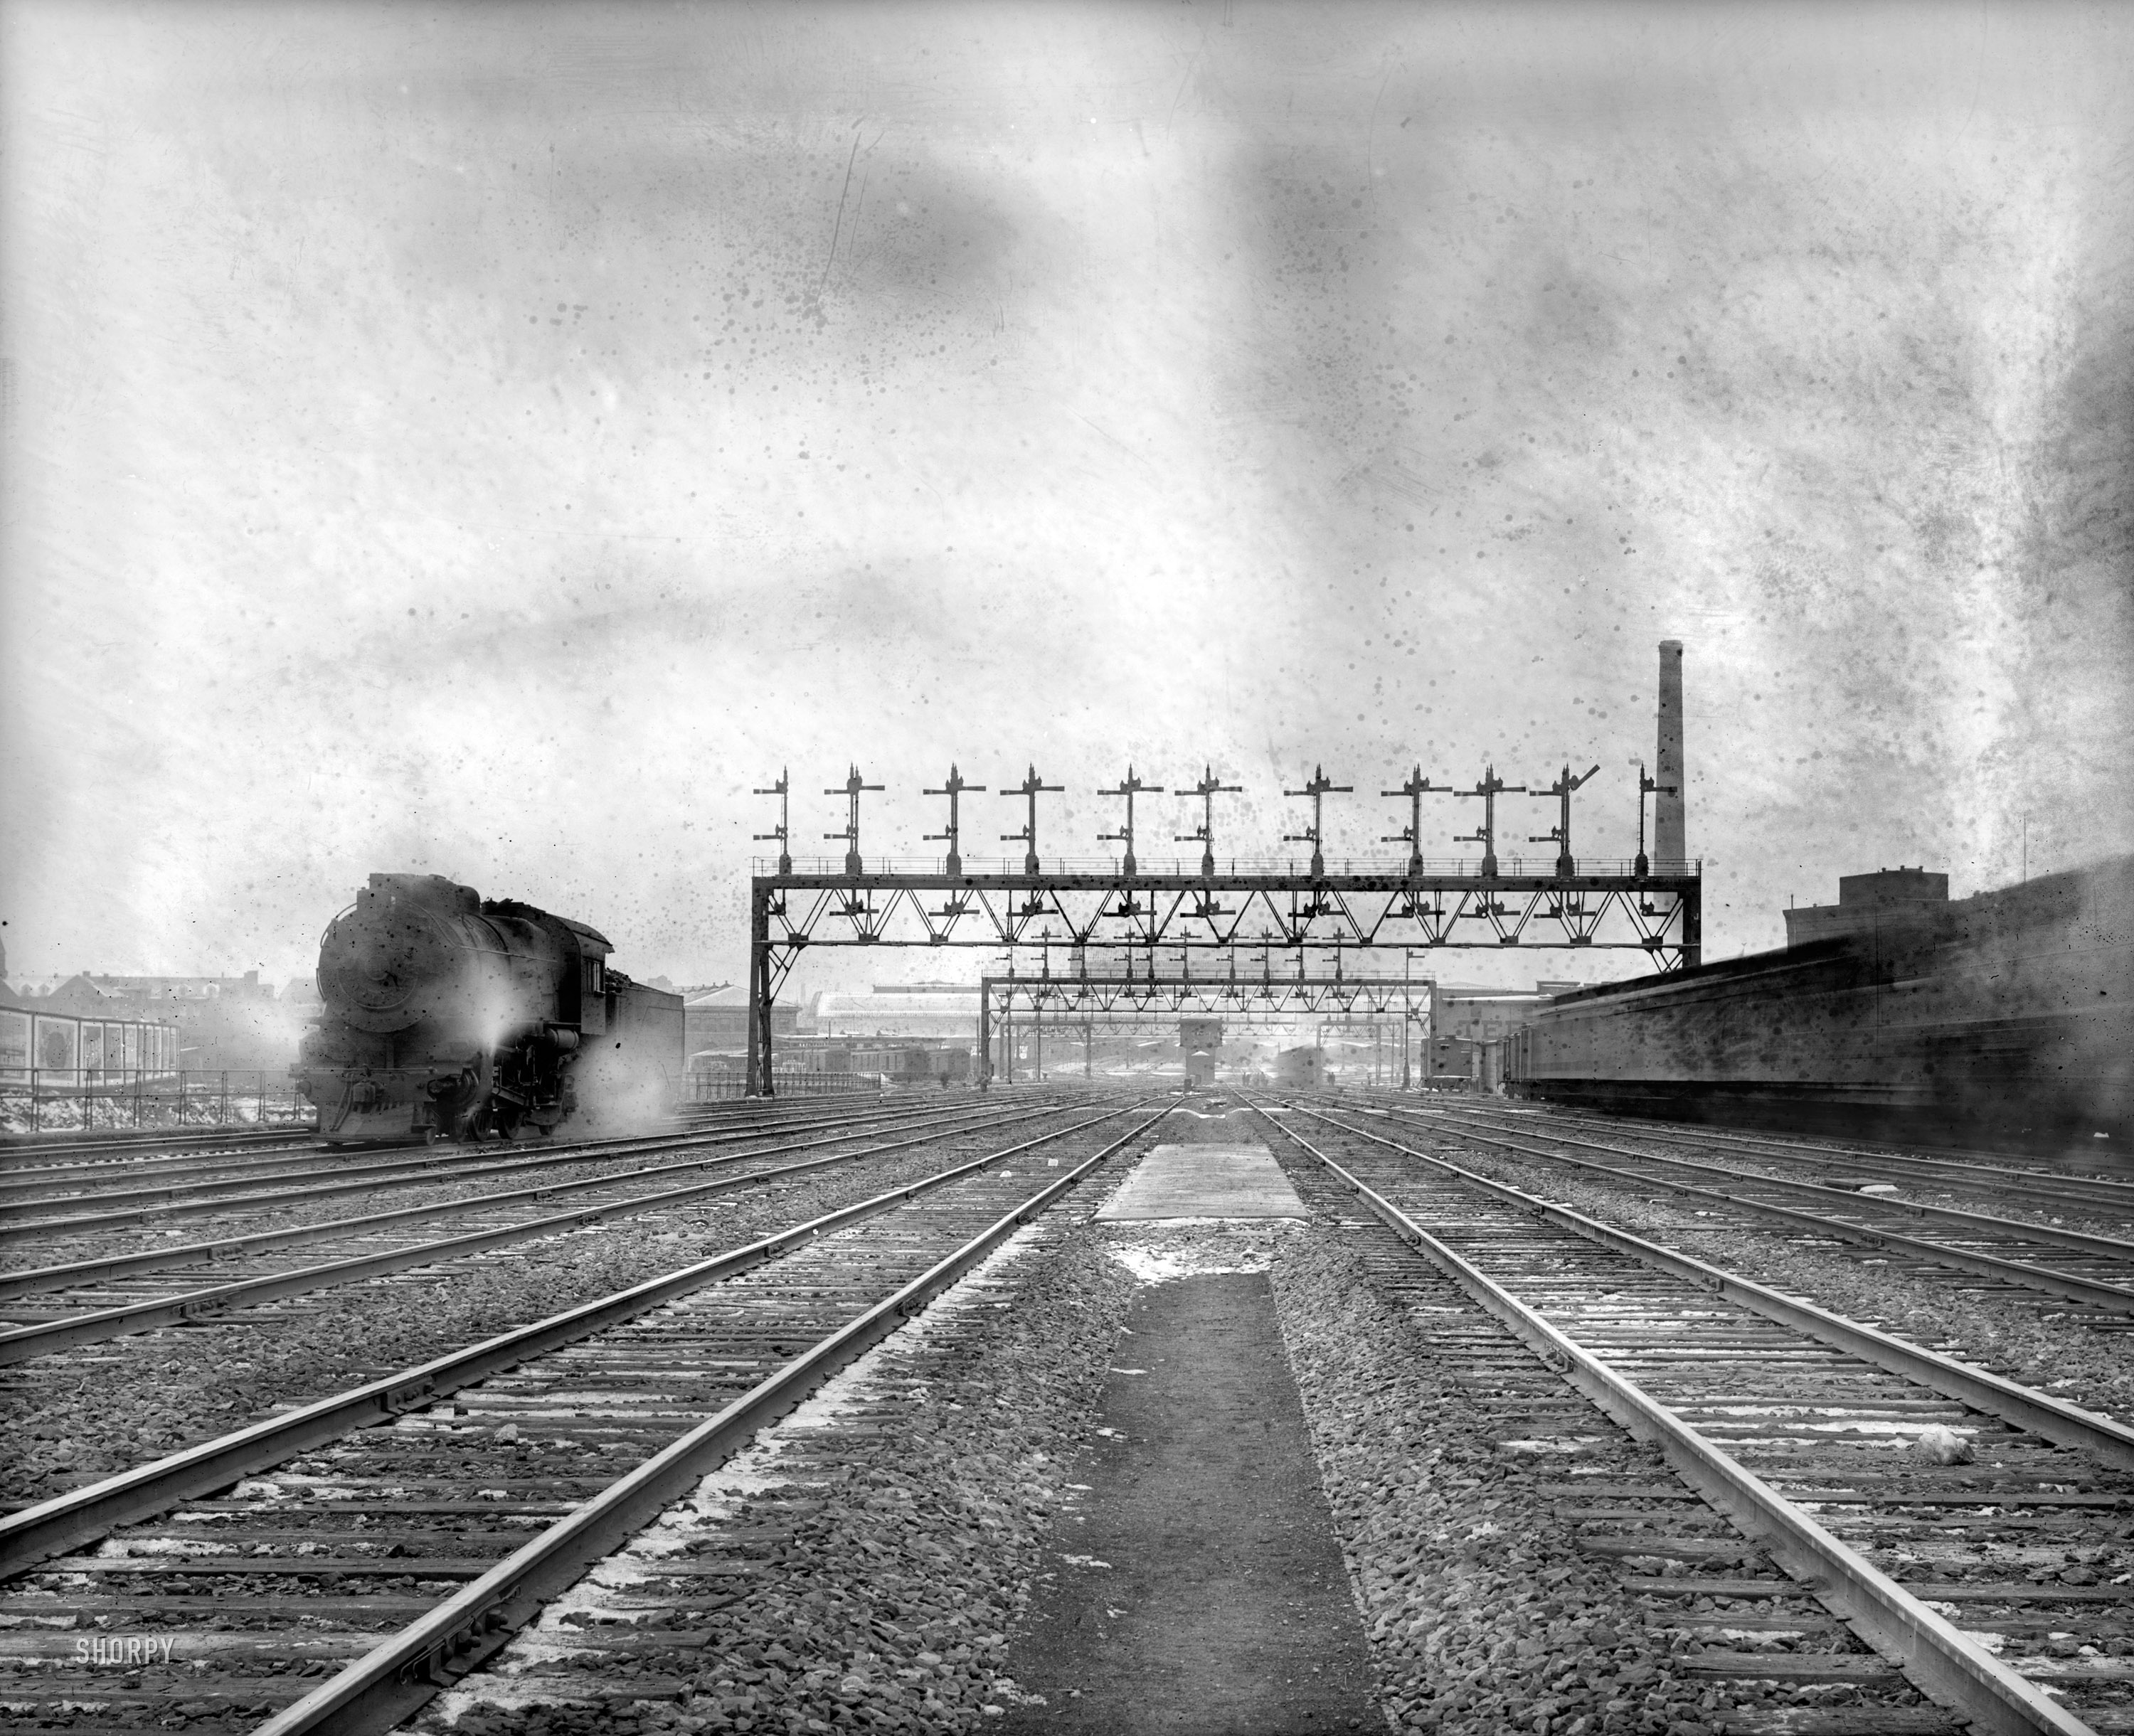 Washington, D.C., circa 1921. "Union Station tracks." Receding in a haze of soot, steam and mildew. National Photo Company glass negative. View full size.